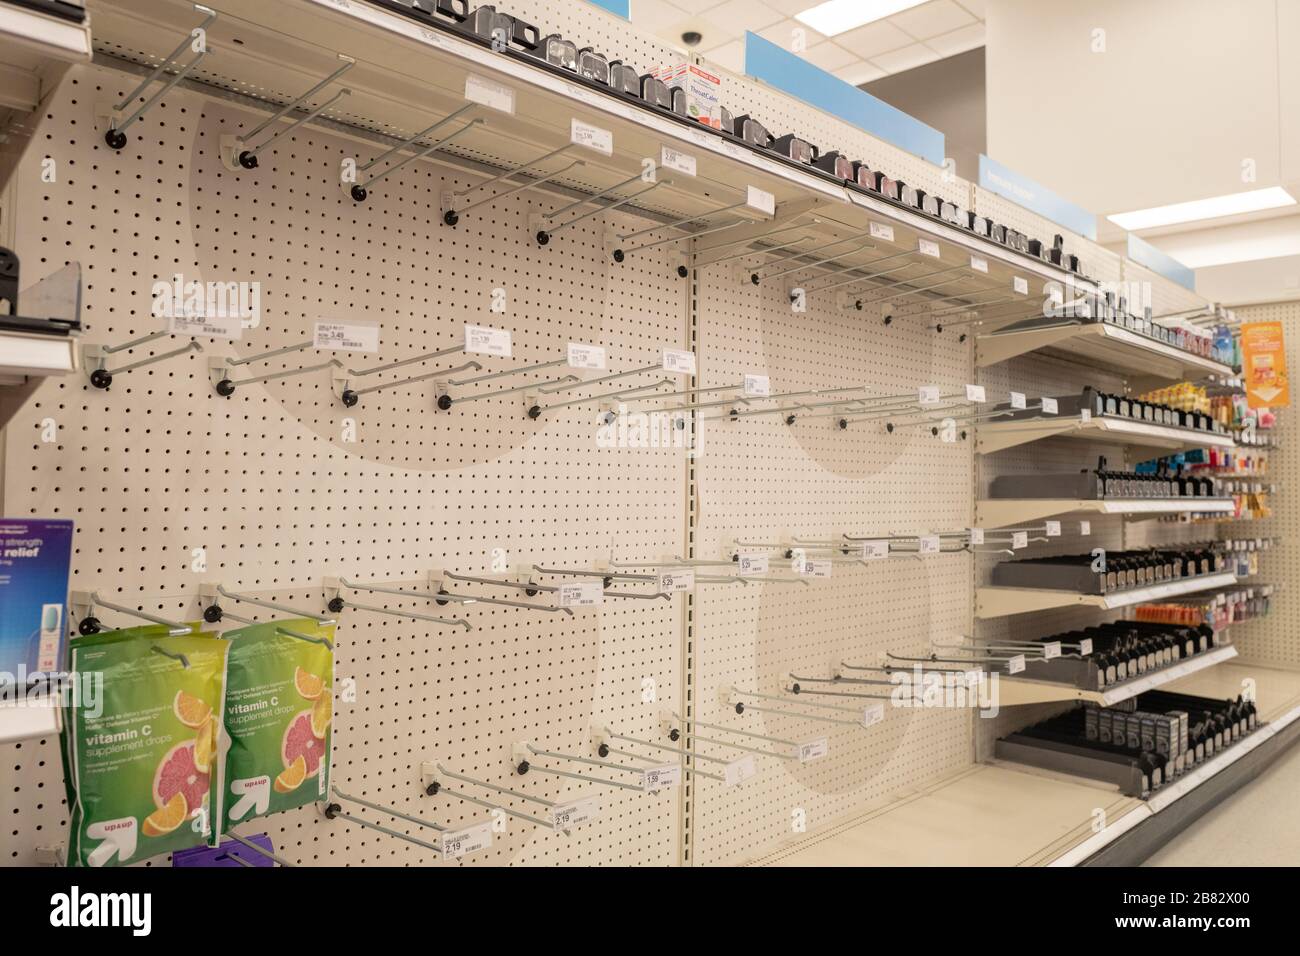 Empty shelves are visible at a Target retail store in Contra Costa County, San Ramon, California, as residents purchase all available stock of toilet paper, paper towels, canned goods, hand sanitizer and other essential items during an outbreak of the COVID-19 coronavirus, March 12, 2020. () Stock Photo